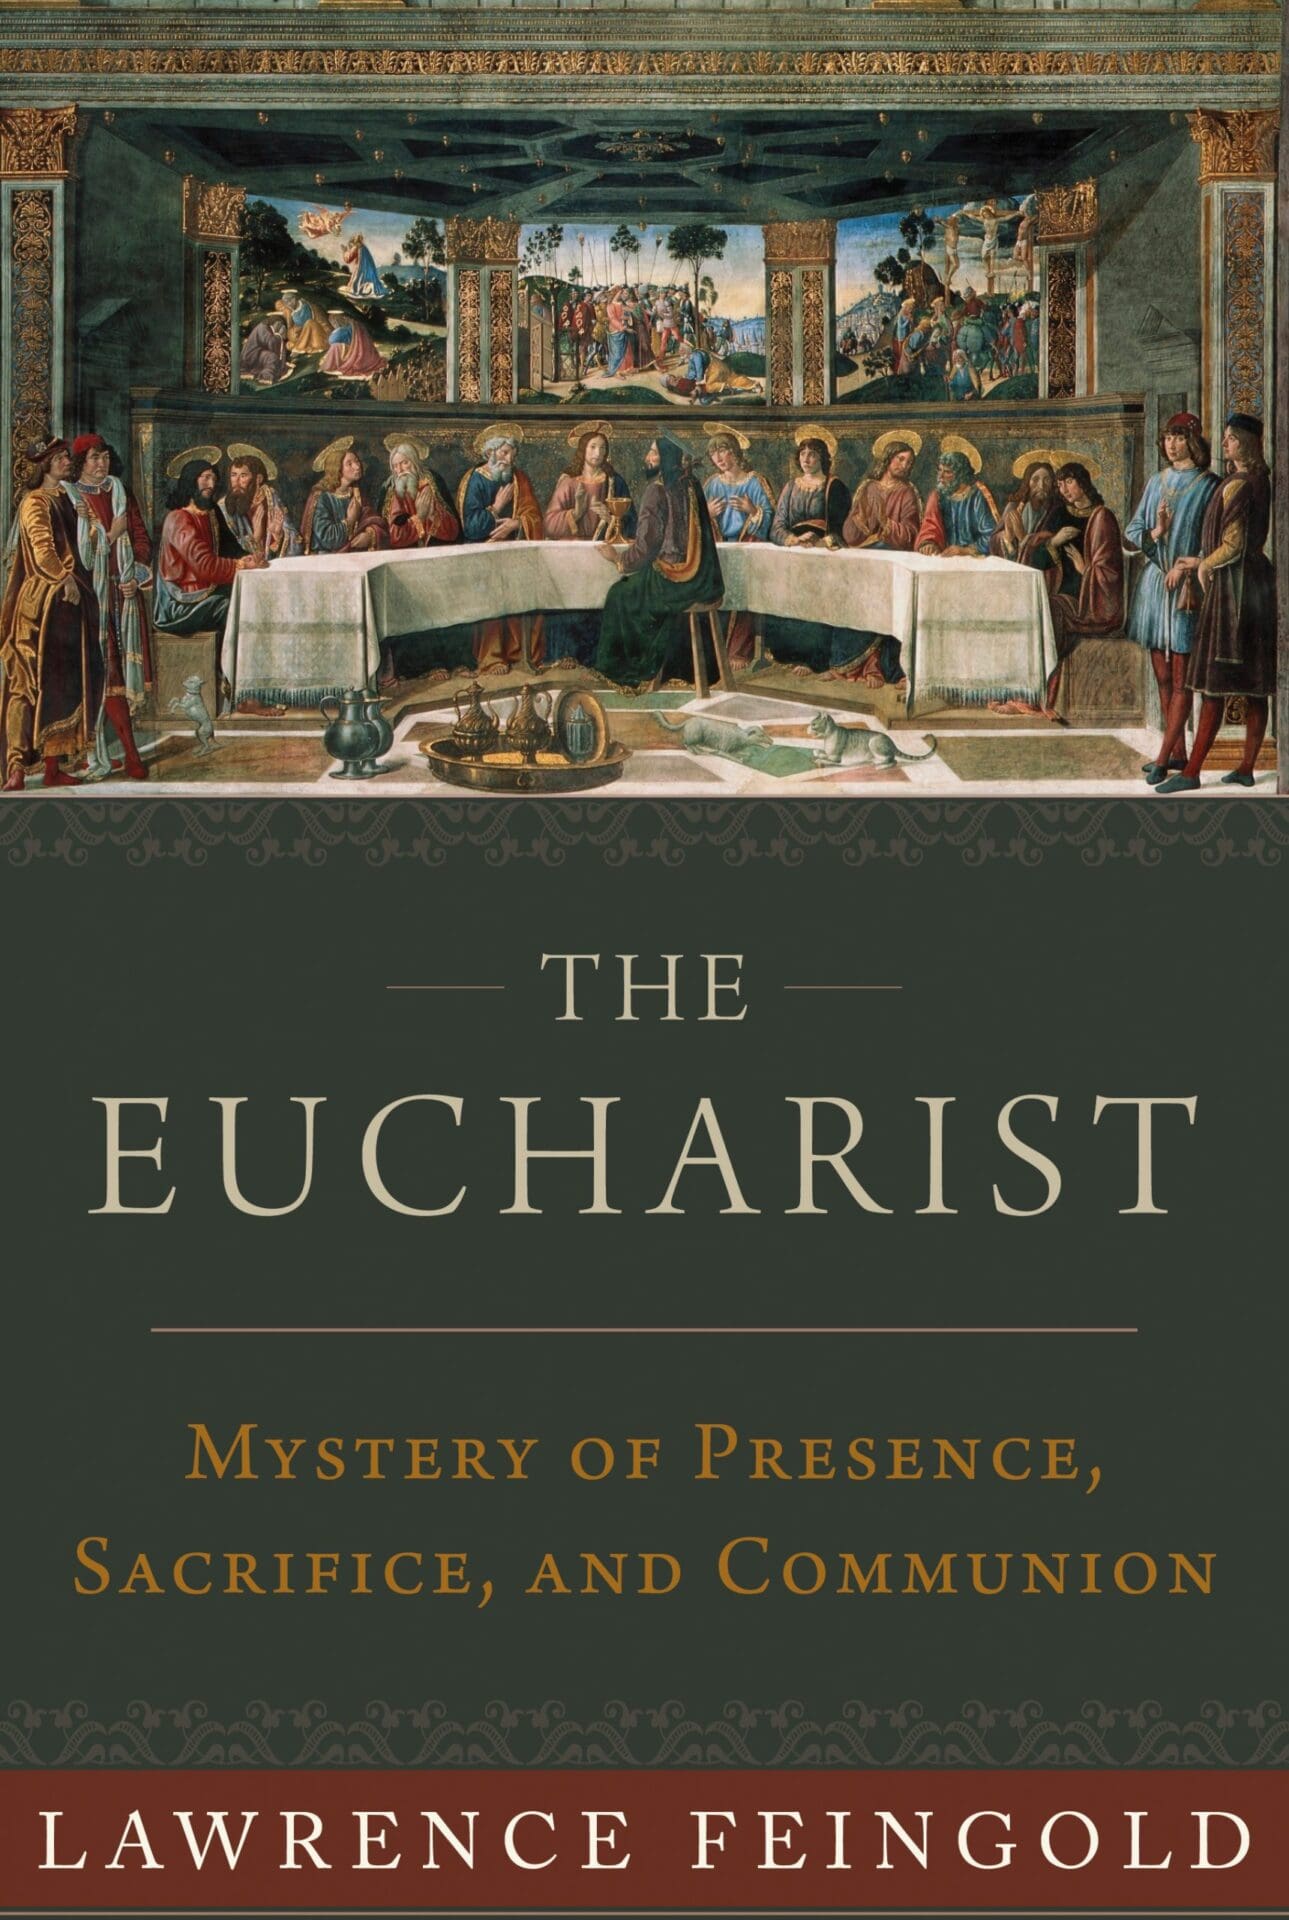 The Gold Standard Textbook on the Holy Eucharist